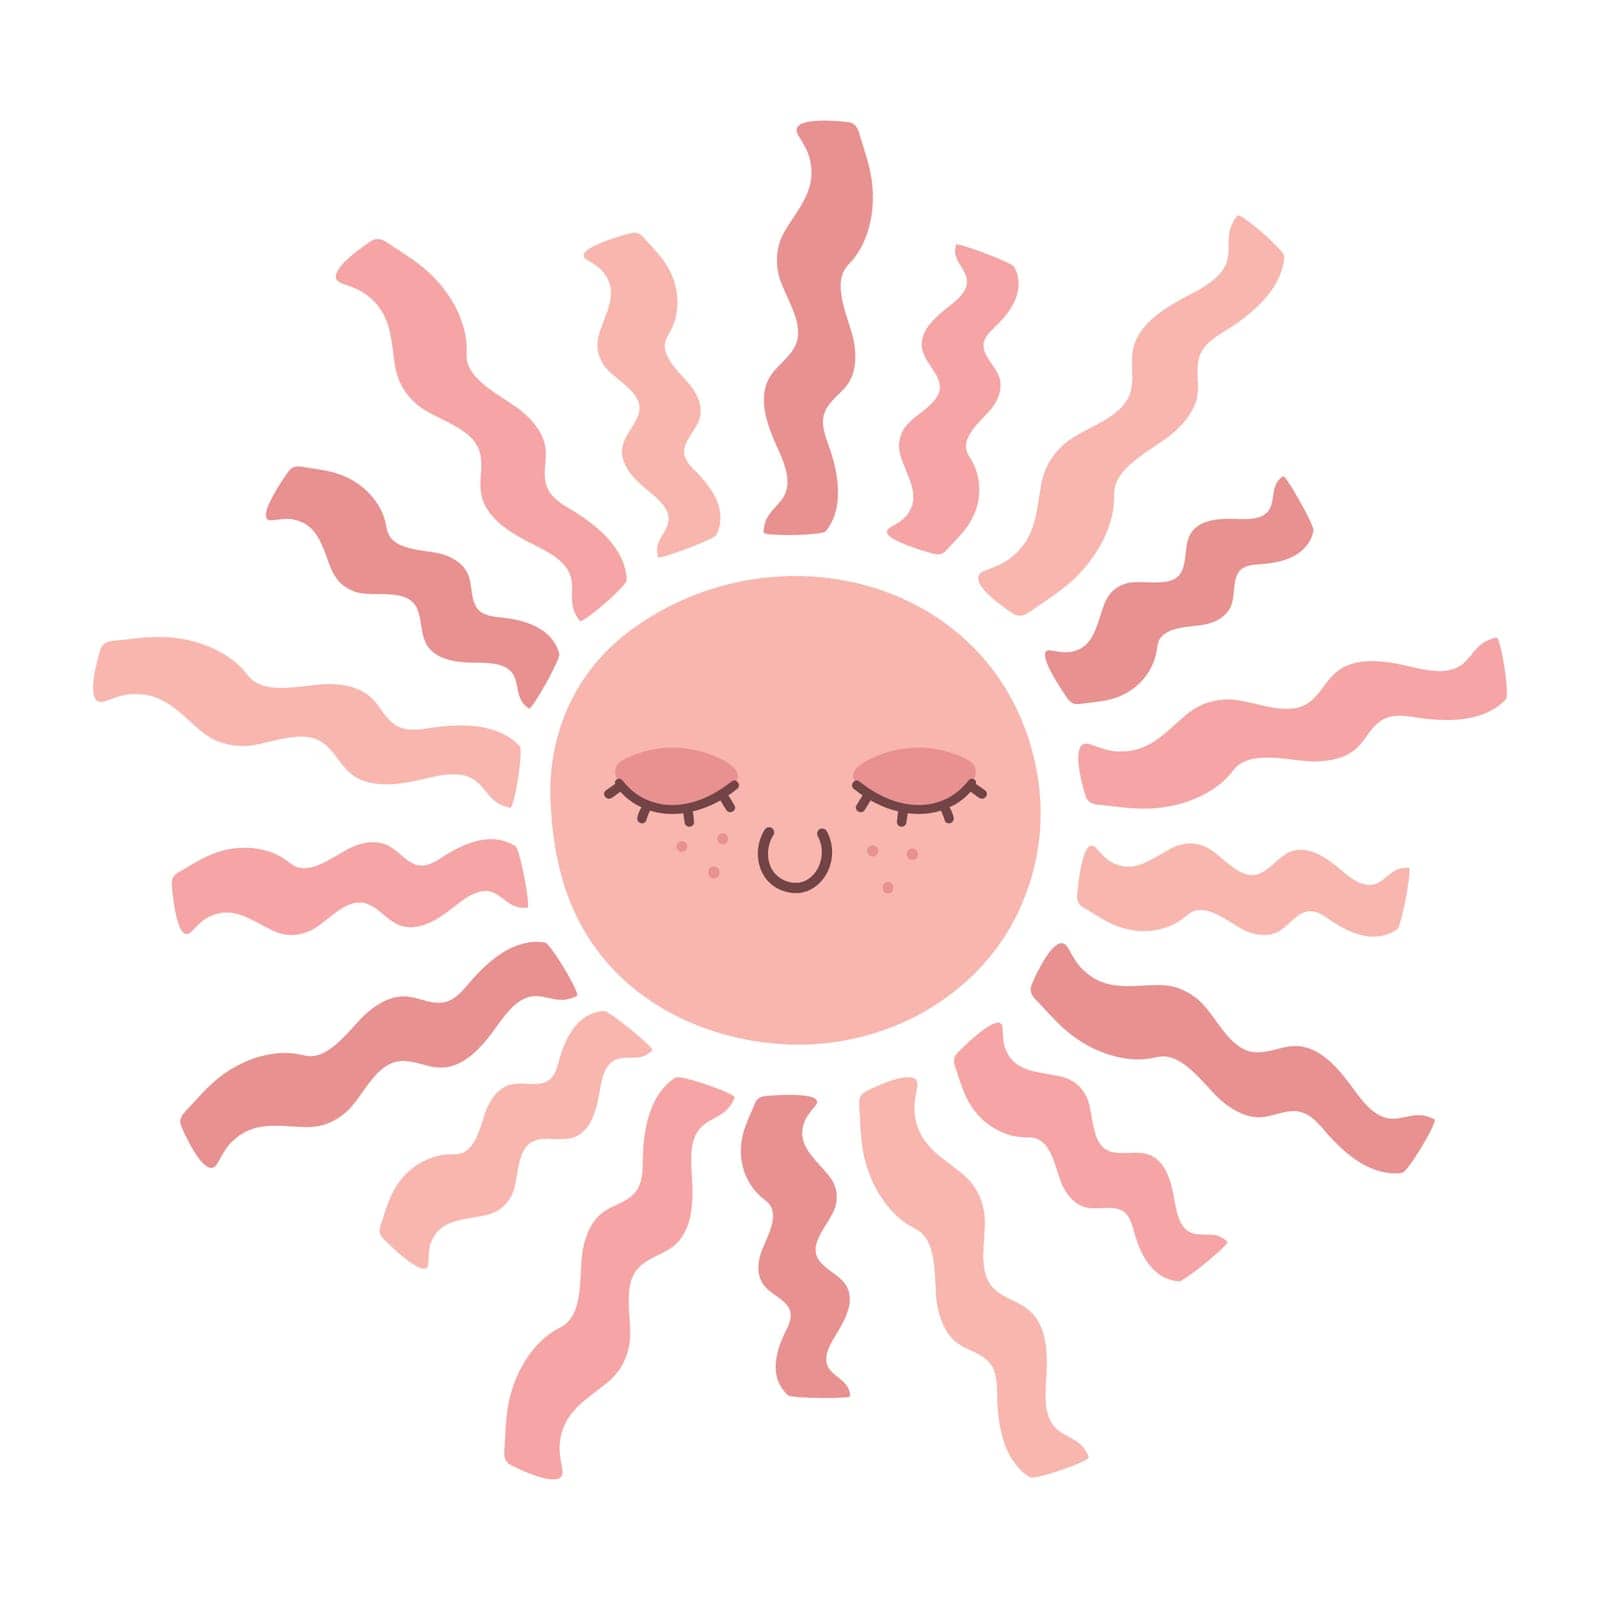 Cute smiling sun in pastel colors. Hand drawn Scandinavian style decoration for nursery kids room. Vector illustration  by psychoche